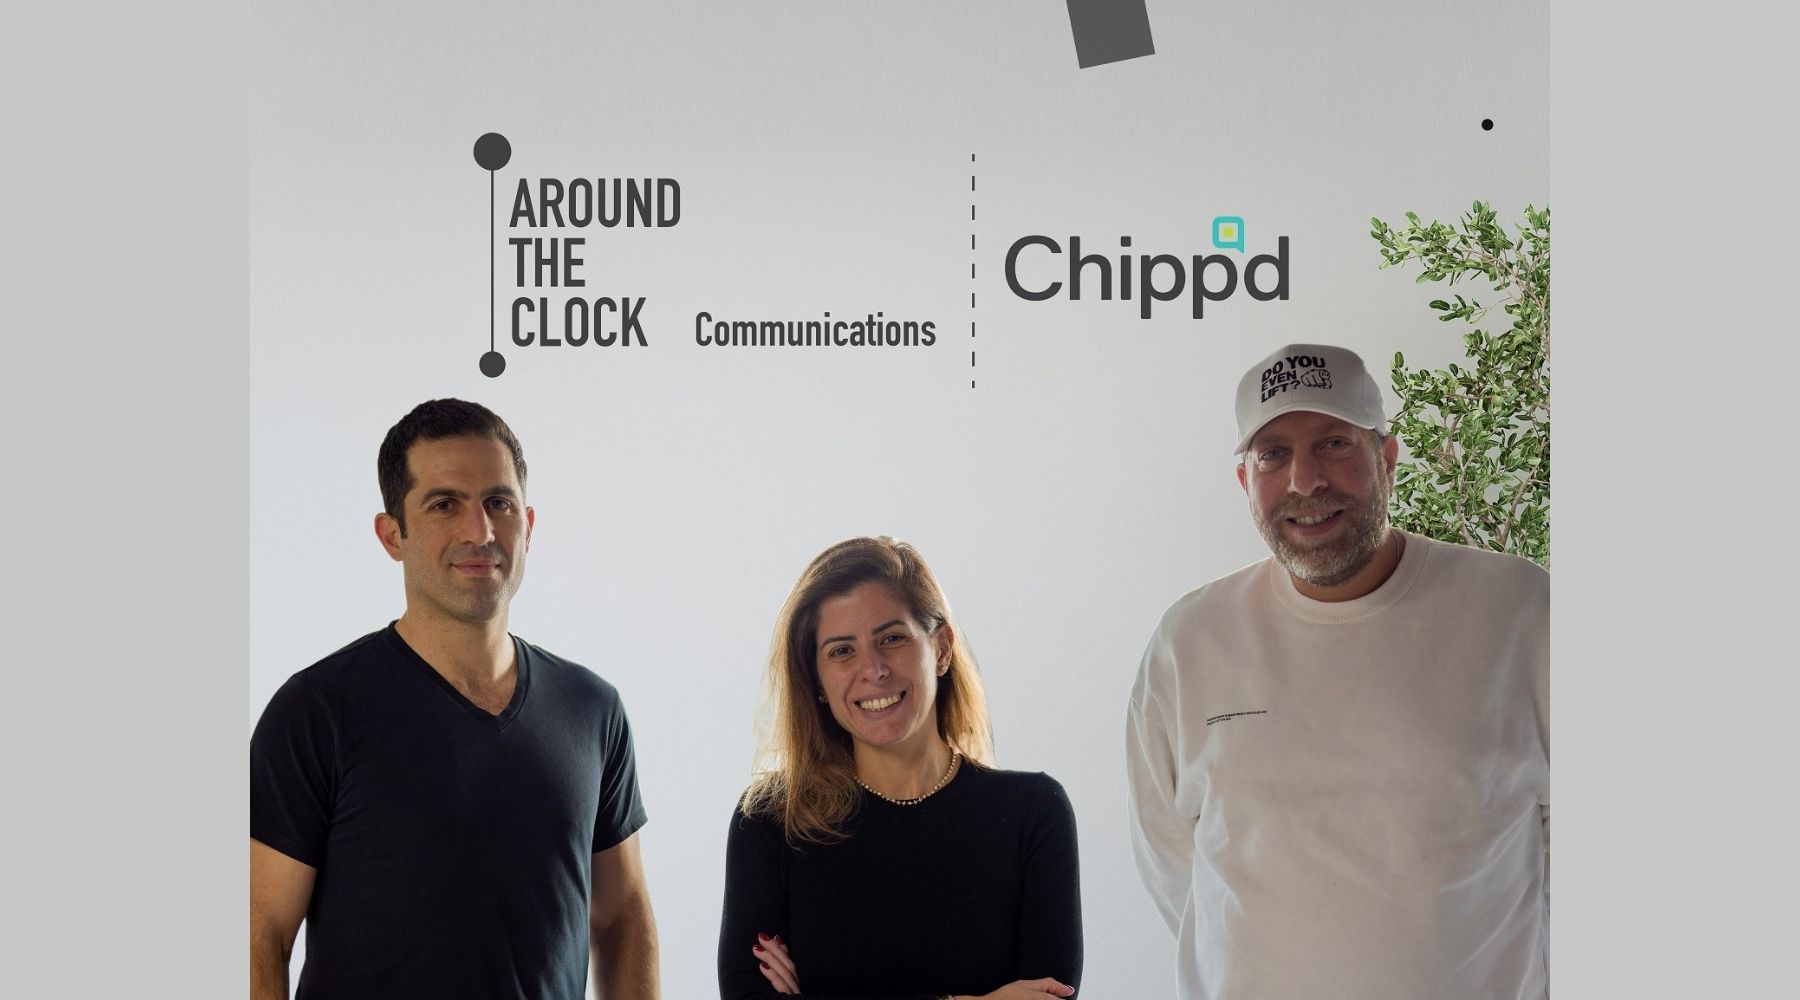 Around The Clock Communications Announces Strategic Partnership with Chipp’d